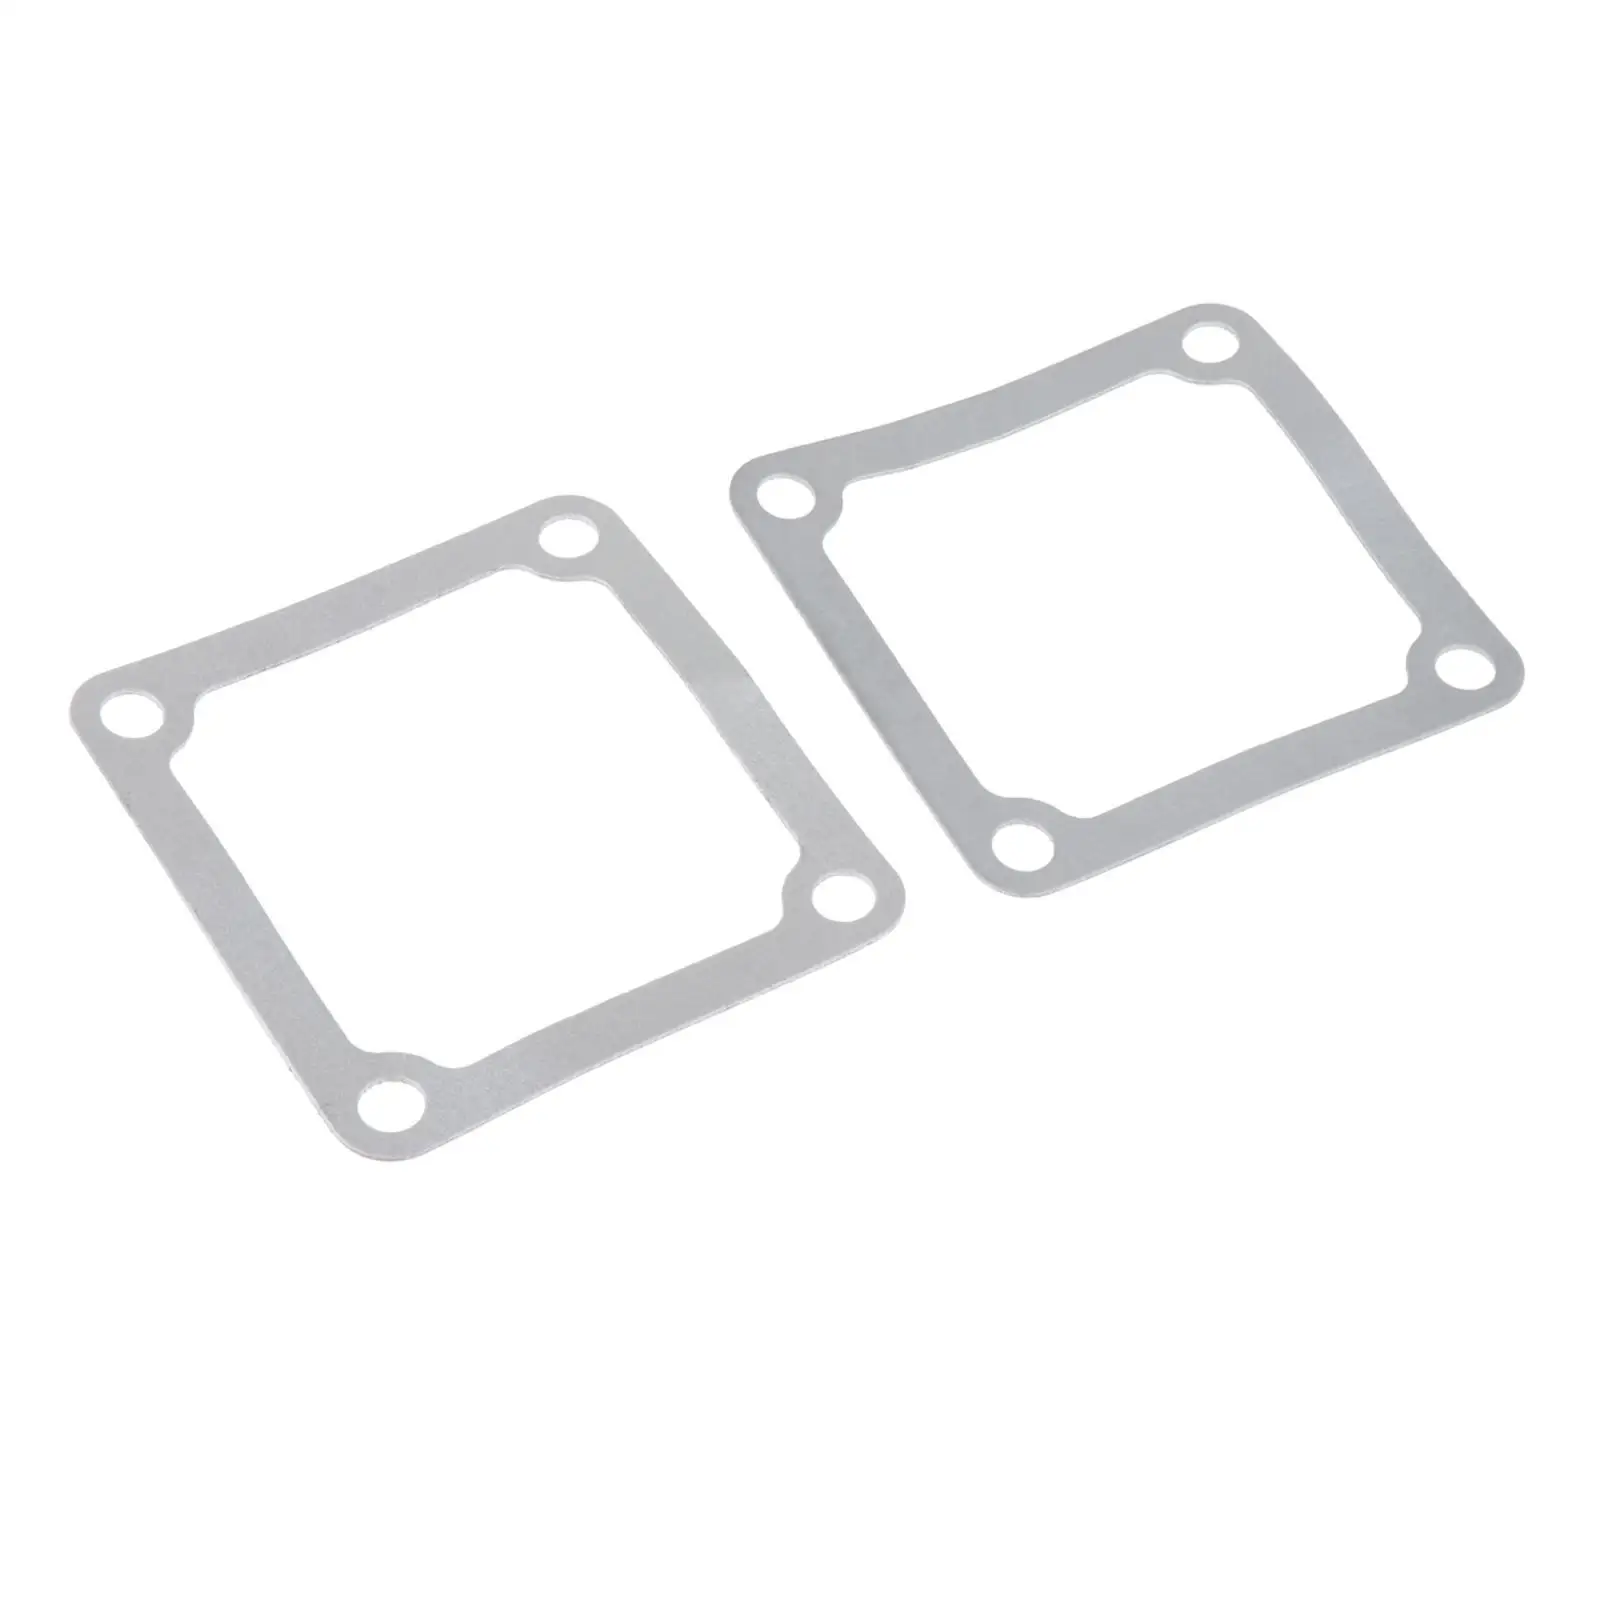 2Pcs Intake Heater Grid Gaskets Vehicle 5.9L Strong Sealing Auto Parts